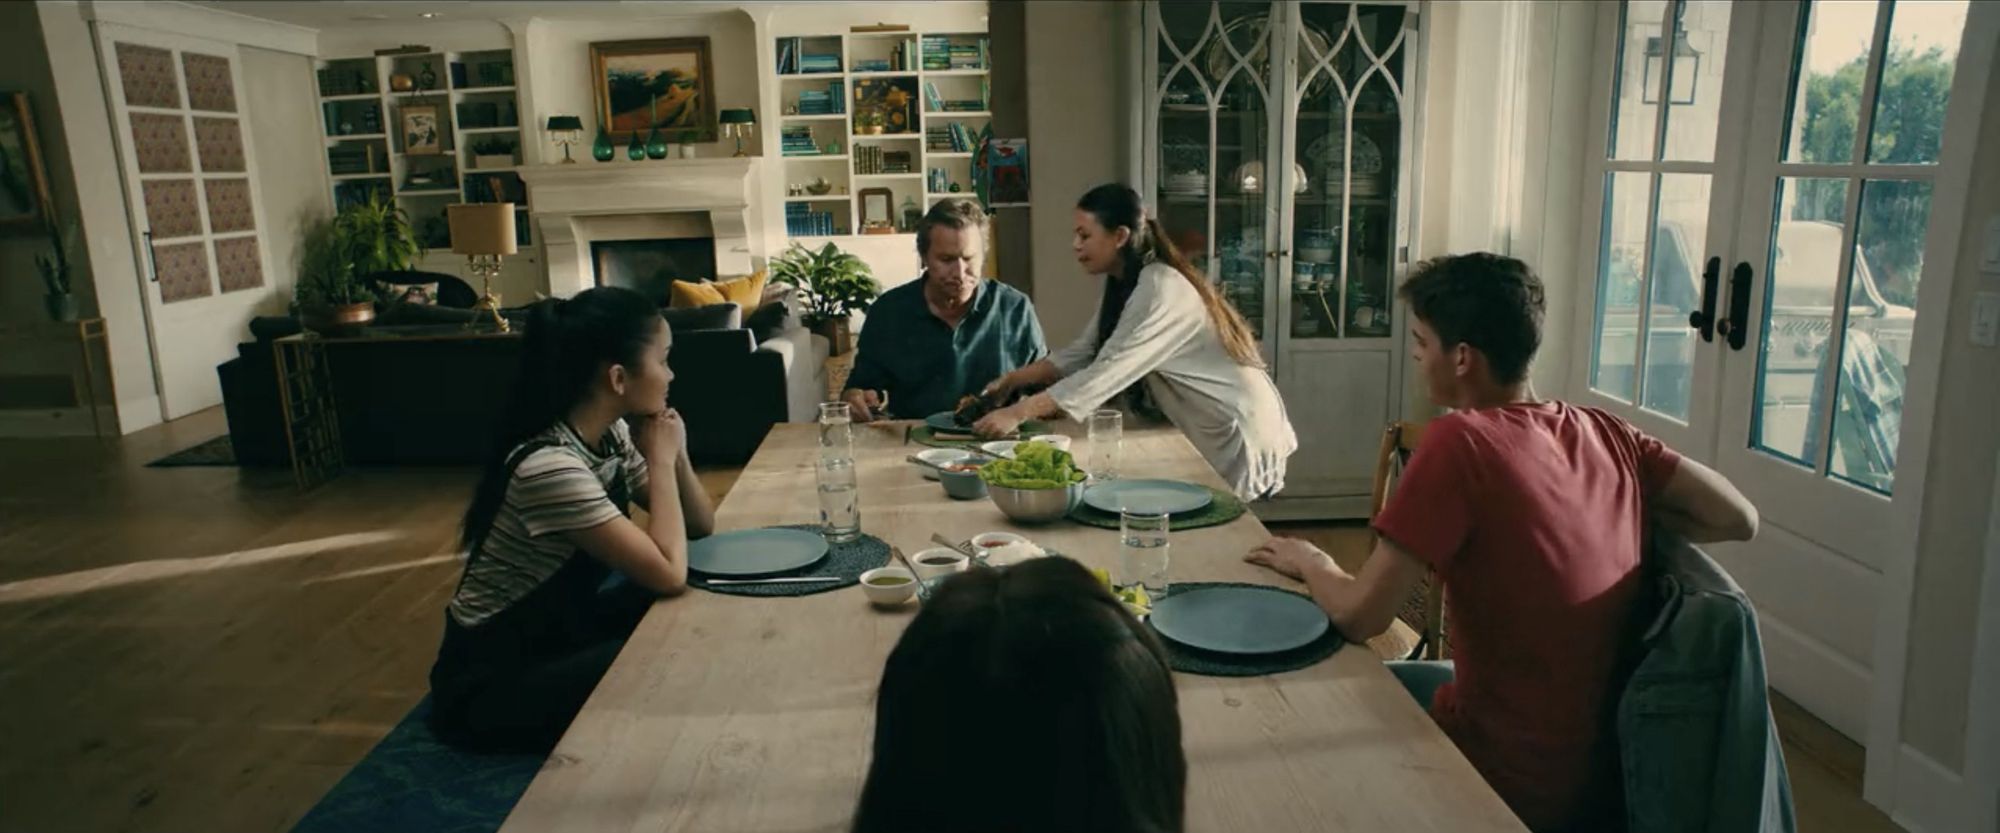 Screenshot of the family in "To All The Boys I've Loved Before" by Netflix